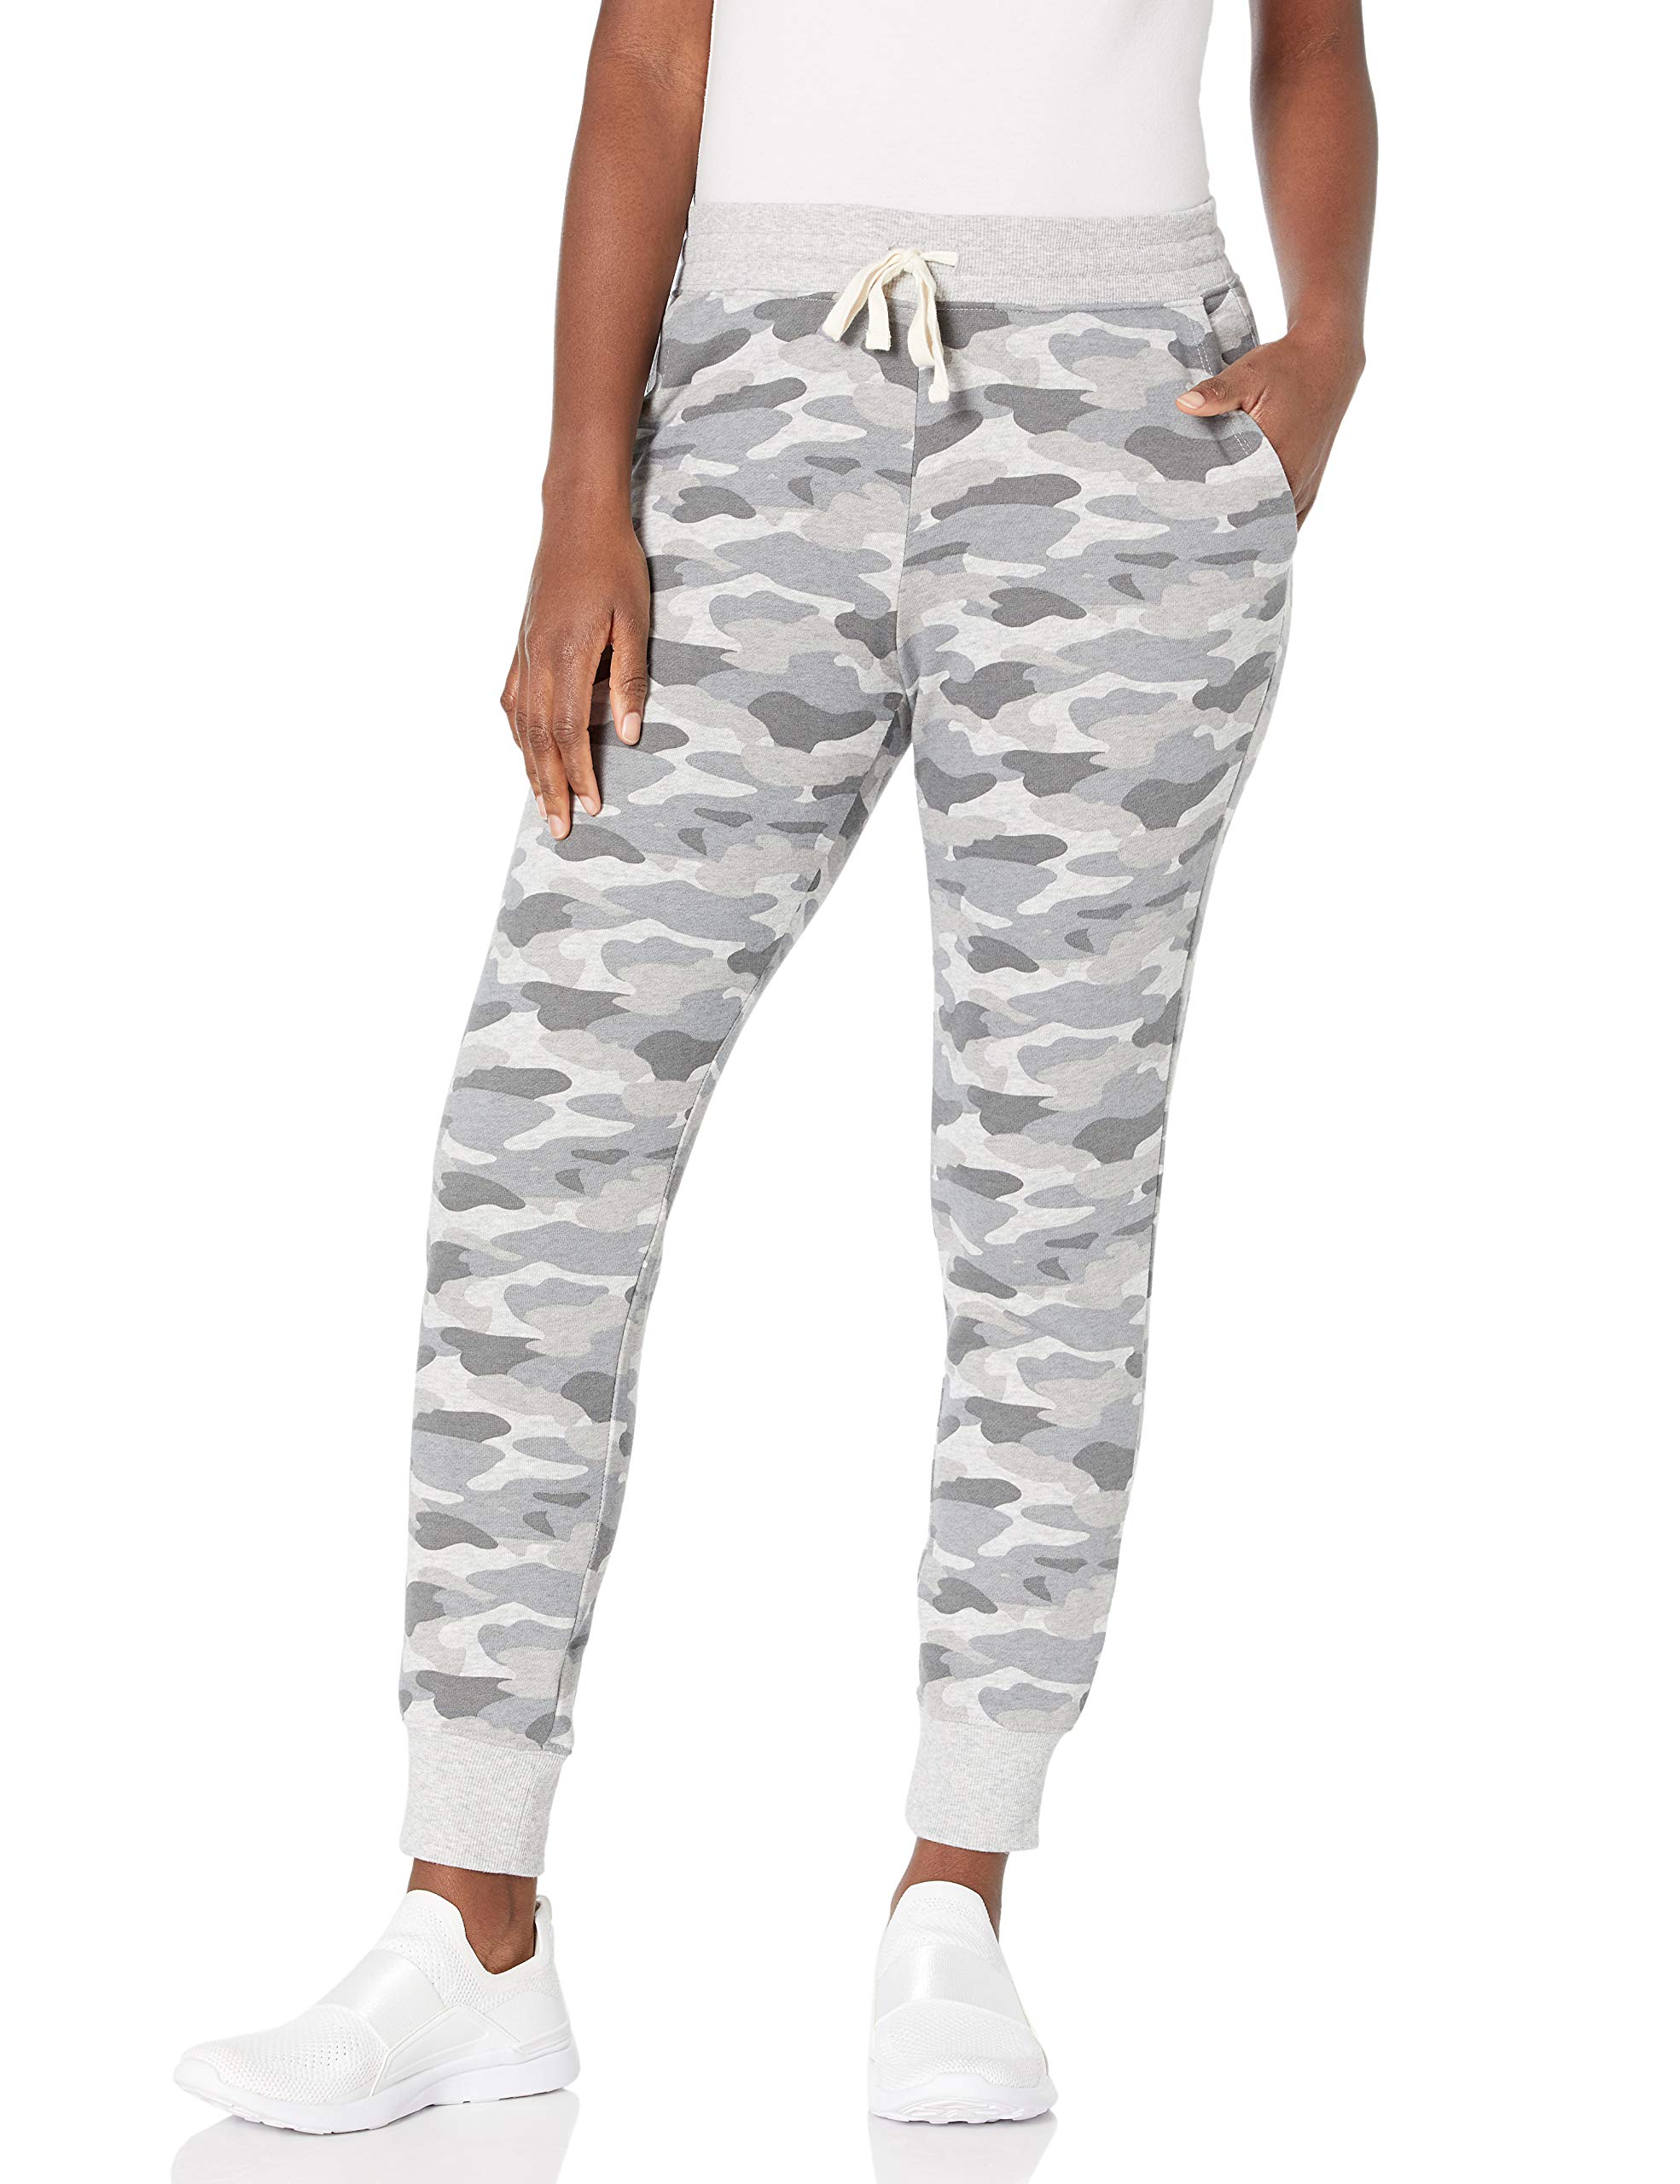 Amazon Essentials Women's French Terry Fleece Jogger Sweatpant (Available in Plus Size)